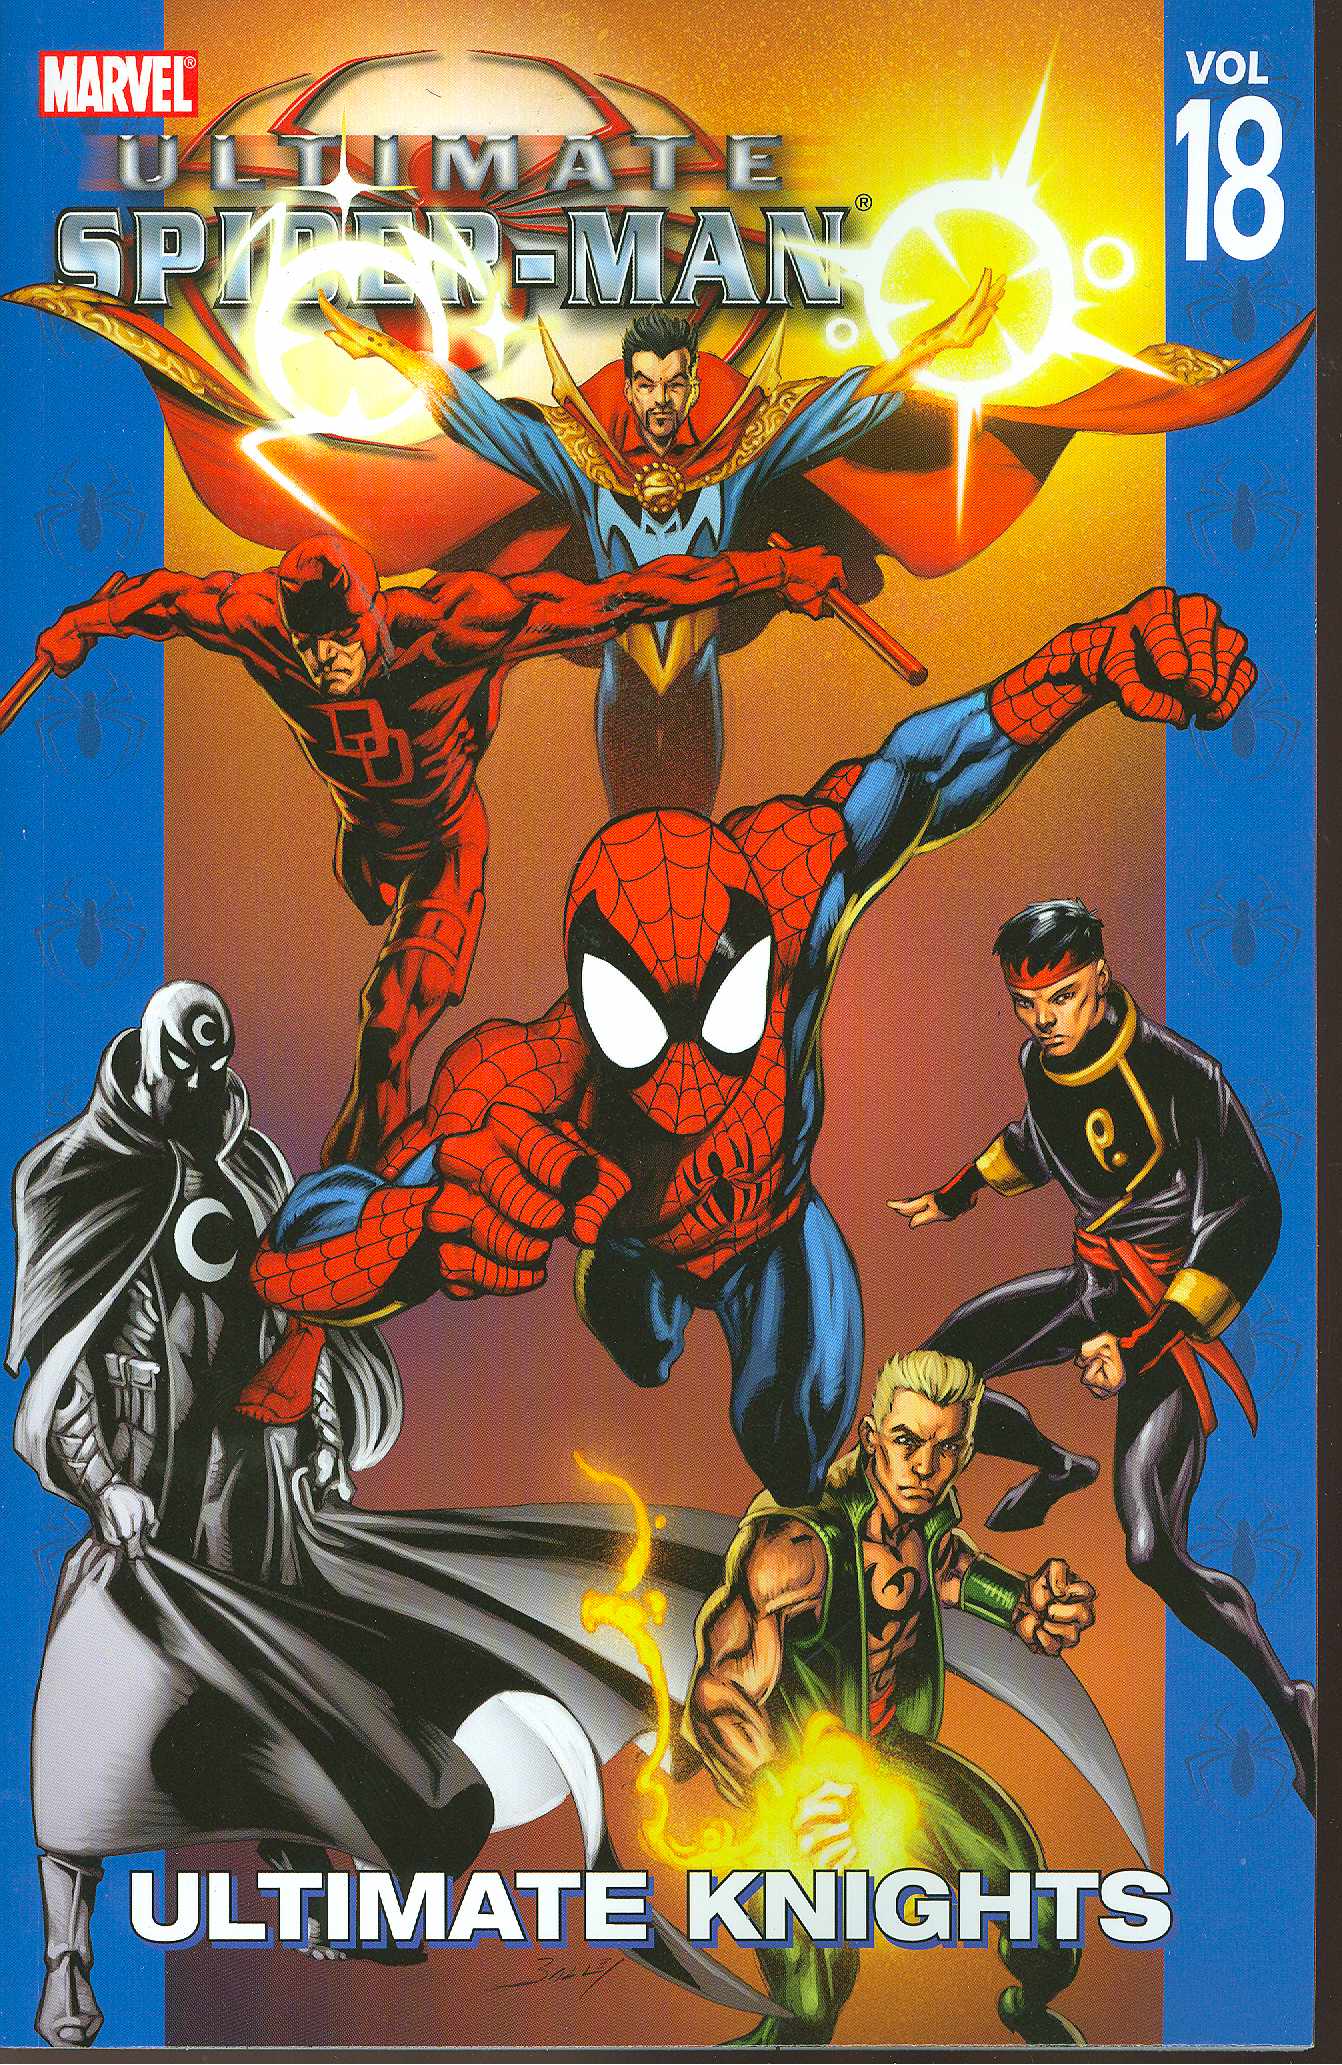 Ultimate Spider-Man Graphic Novel Volume 18 Ultimate Knights